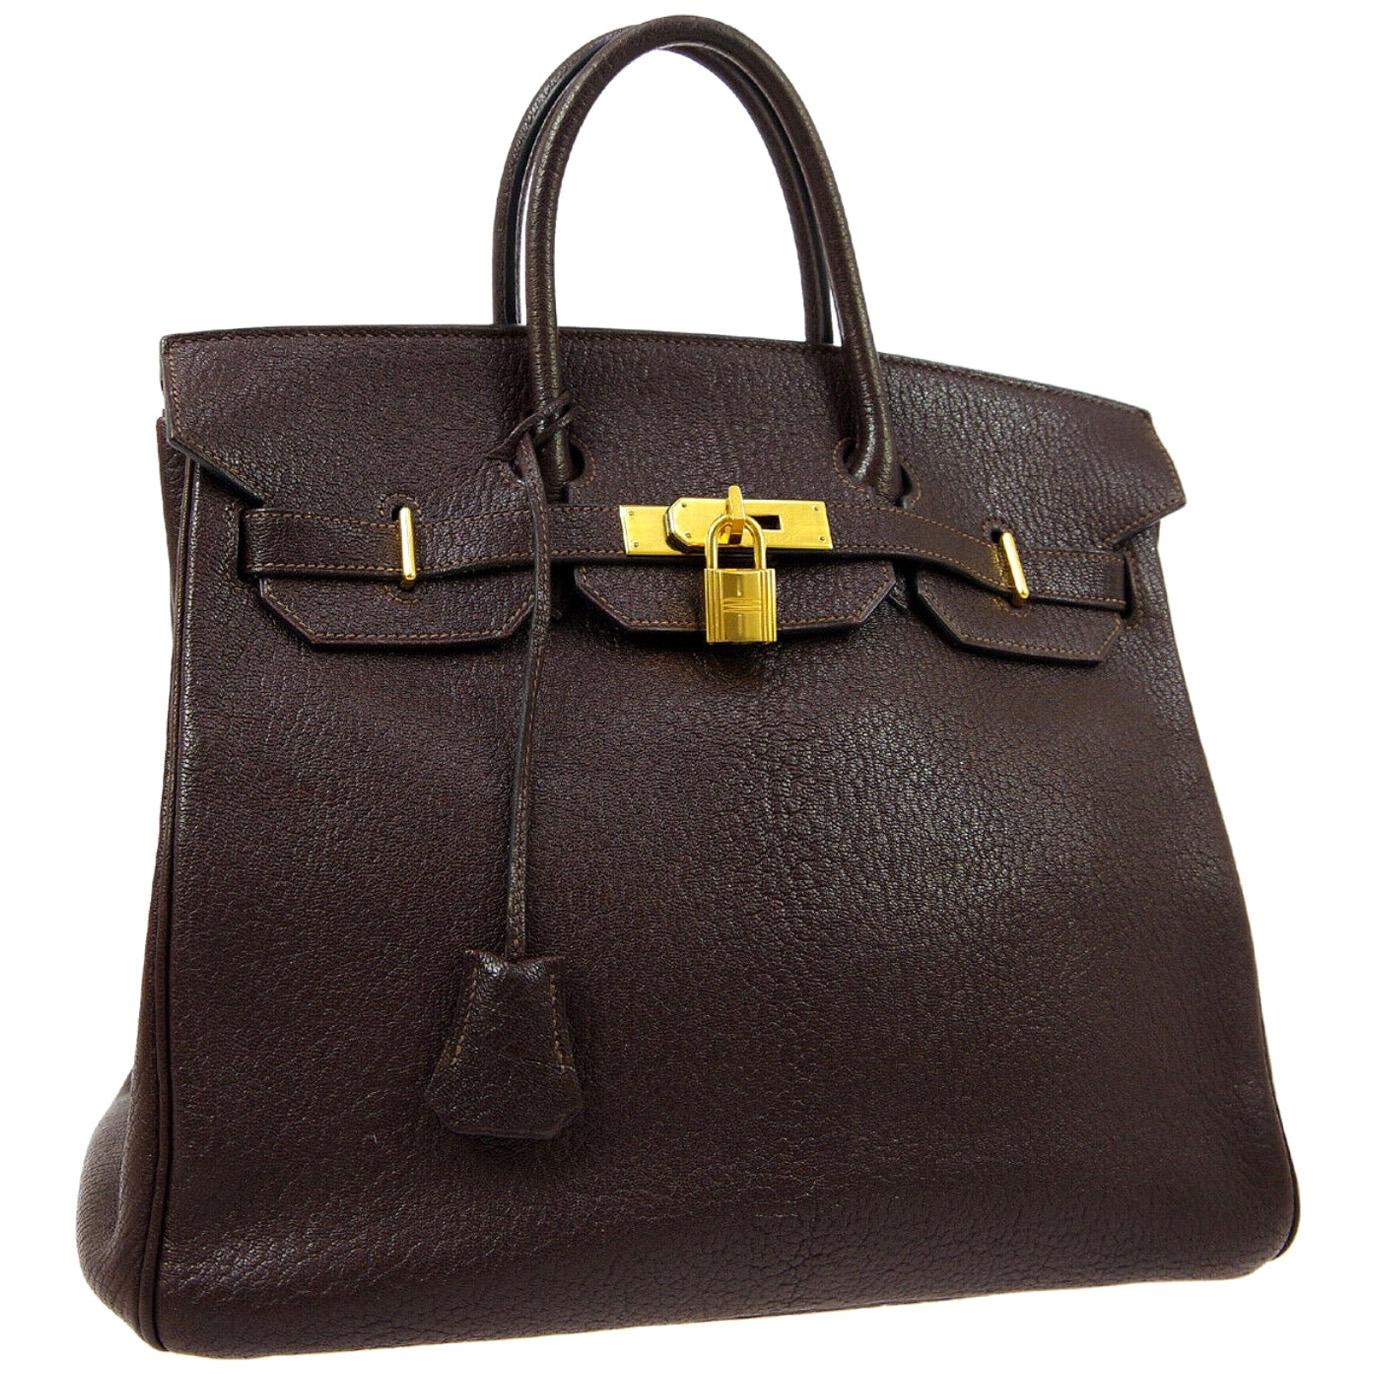 Hermes HAC 32 Dark Chocolate Leather Gold Carryall Travel Top Handle Tote Bag